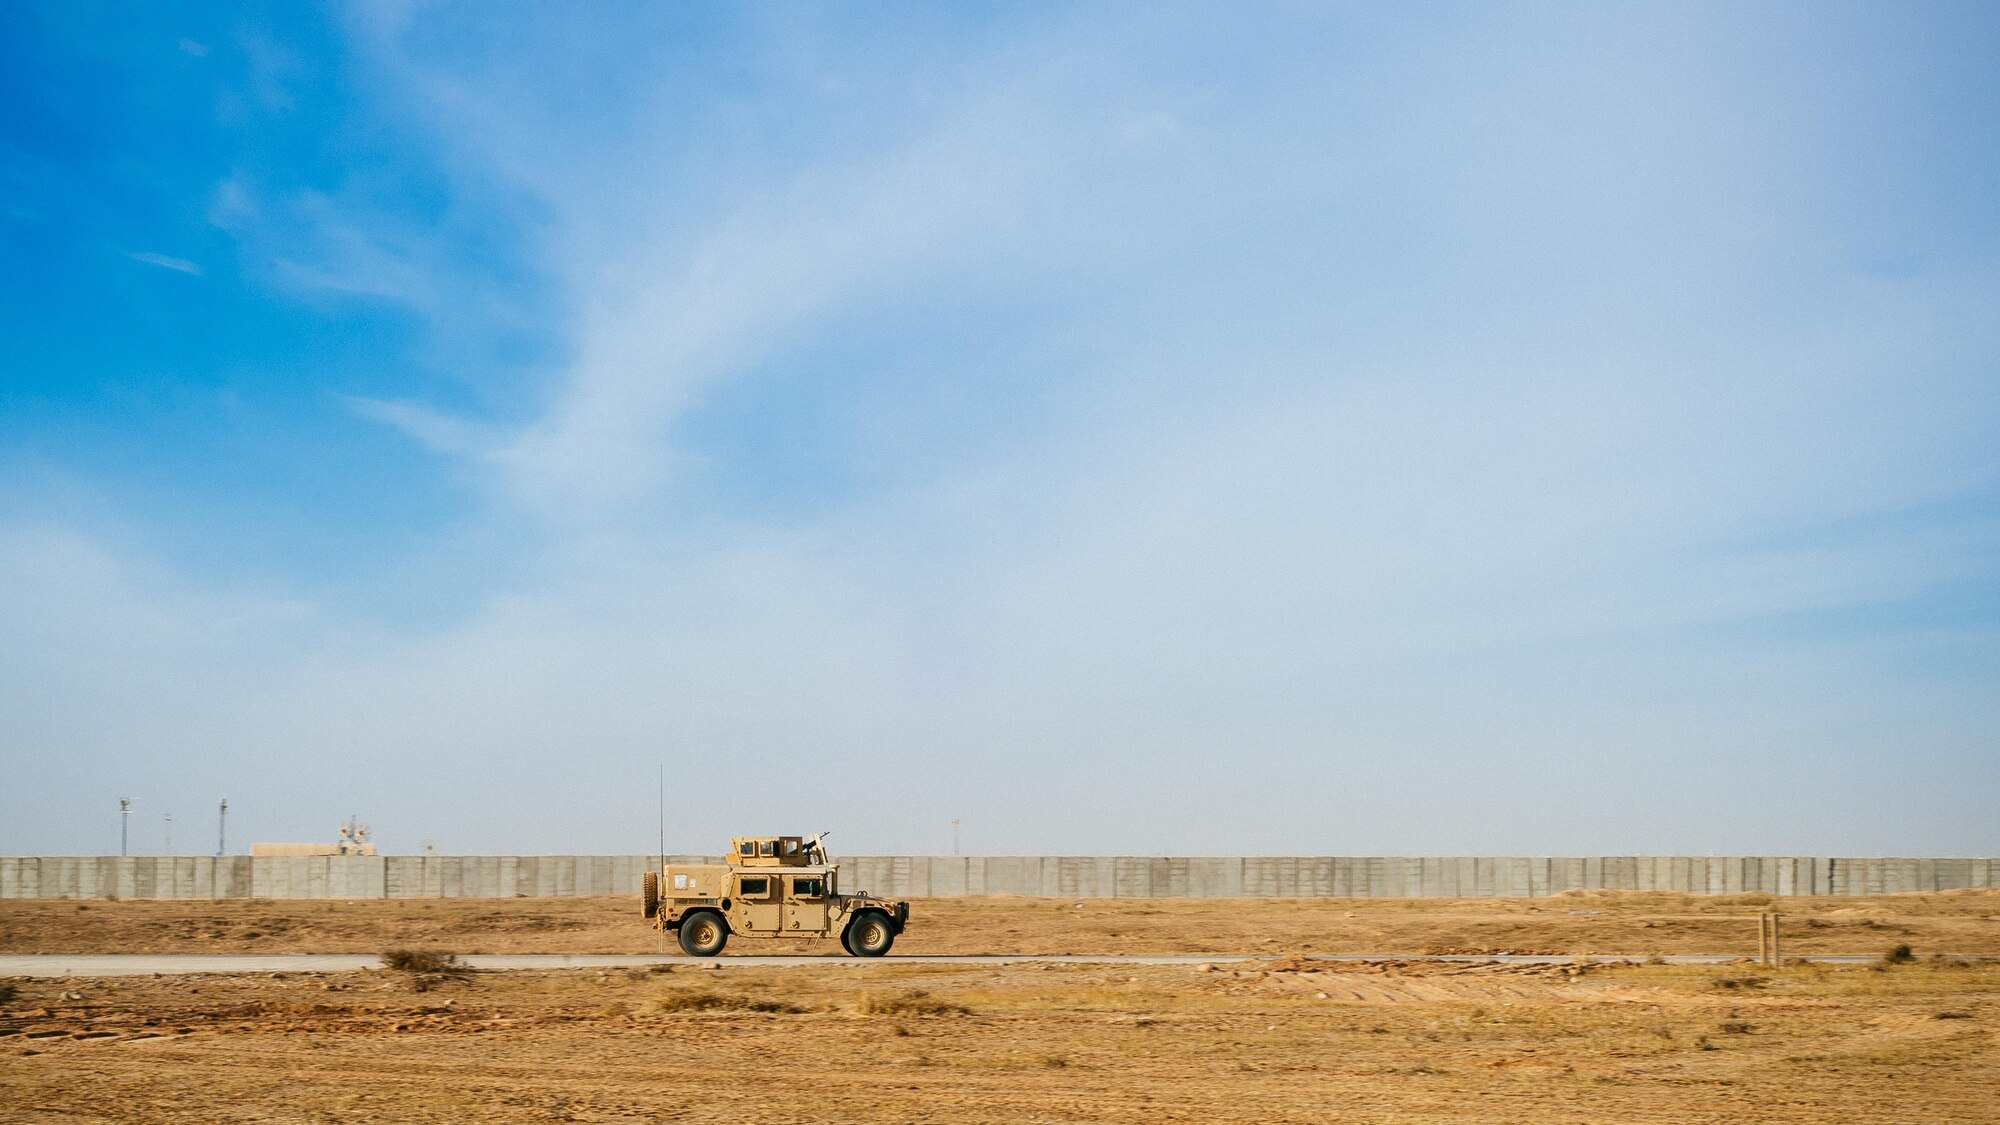 A 821st Contingency Response Group HUMVEE patrols the taxiway at Qayyarah West Airfield, Iraq, in support of Combined Joint Task Force - Operation Inherent Resolve, Nov. 13, 2016. The airfield at Qayyarah West was recaptured from Da’esh by Iraqi forces in July 2016, and has been refurbished by Coalition engineers to allow the re-commencement of air operations. Qayyarah Airfield is now a vital logistical hub, opening an air corridor in support of the battle to liberate Mosul as well as operations throughout northern Iraq. (U.S. Air Force photo by Senior Airman Jordan Castelan)